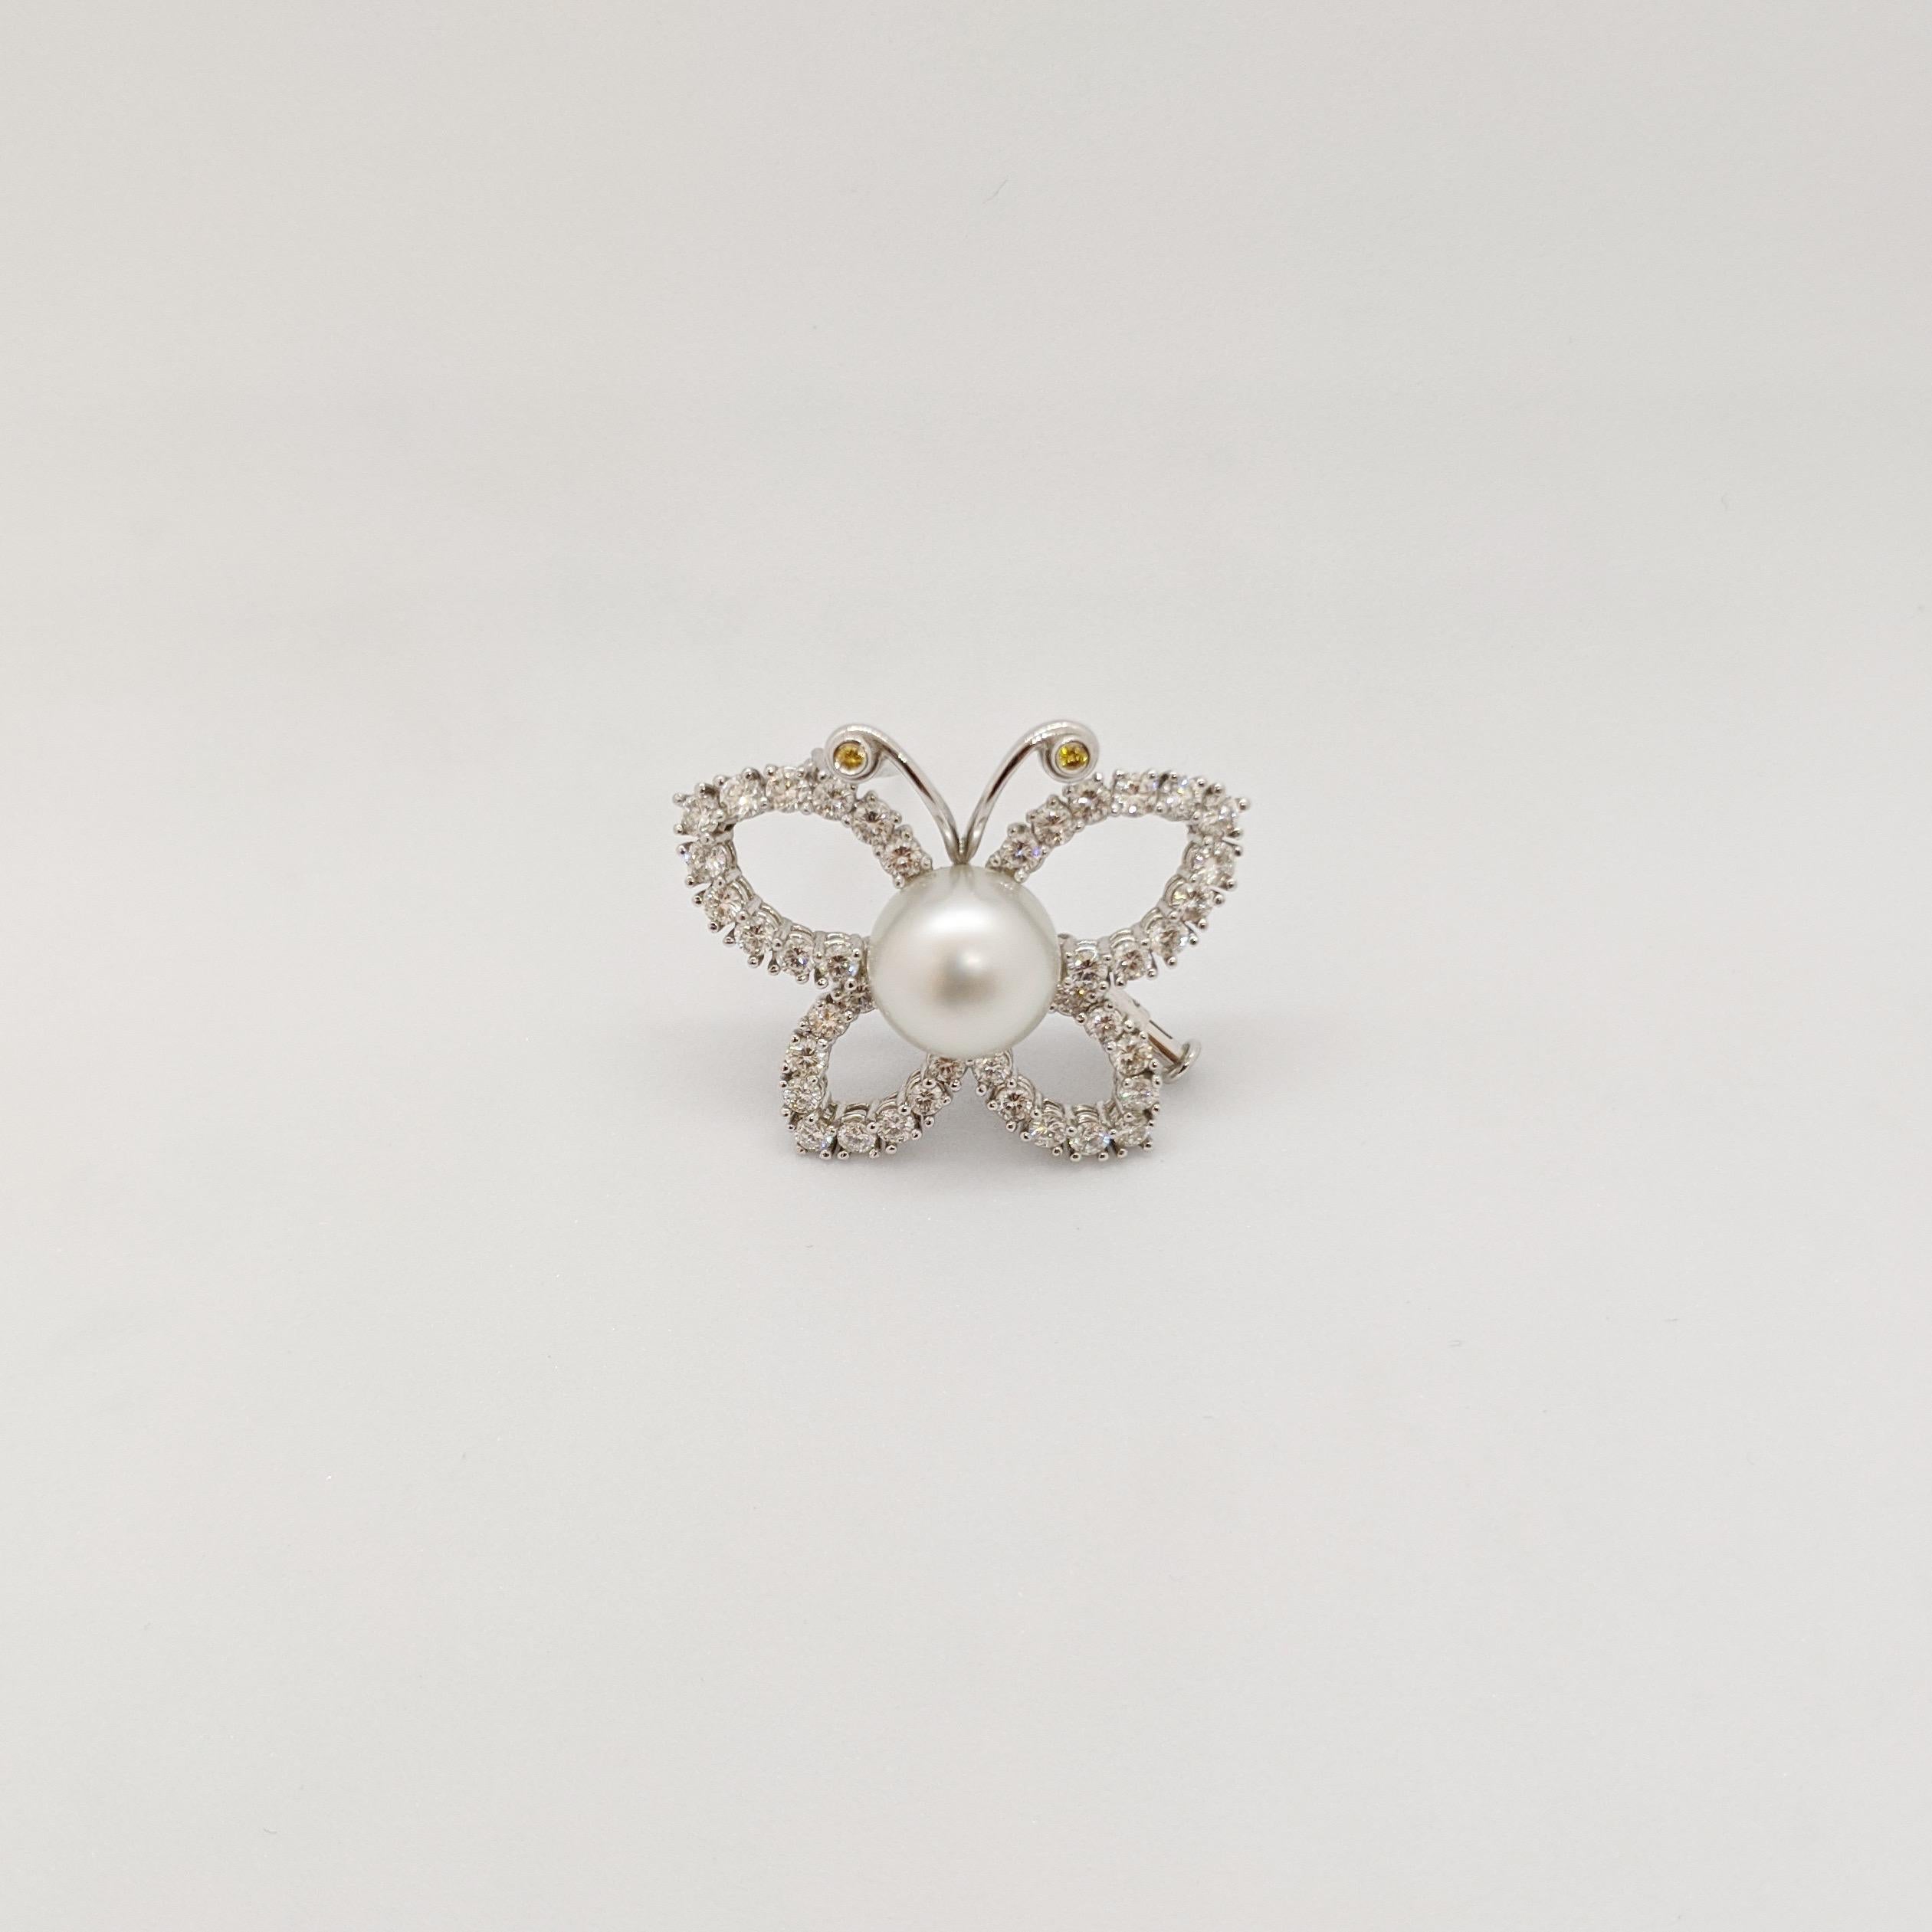 This lovely Butterfly brooch is  prong set round brilliant Diamonds. The 2 aatennae have bezel set diamonds. The center of the brooch is a 11.3 mm South Sea Pearl. The butterfly measures 1.25